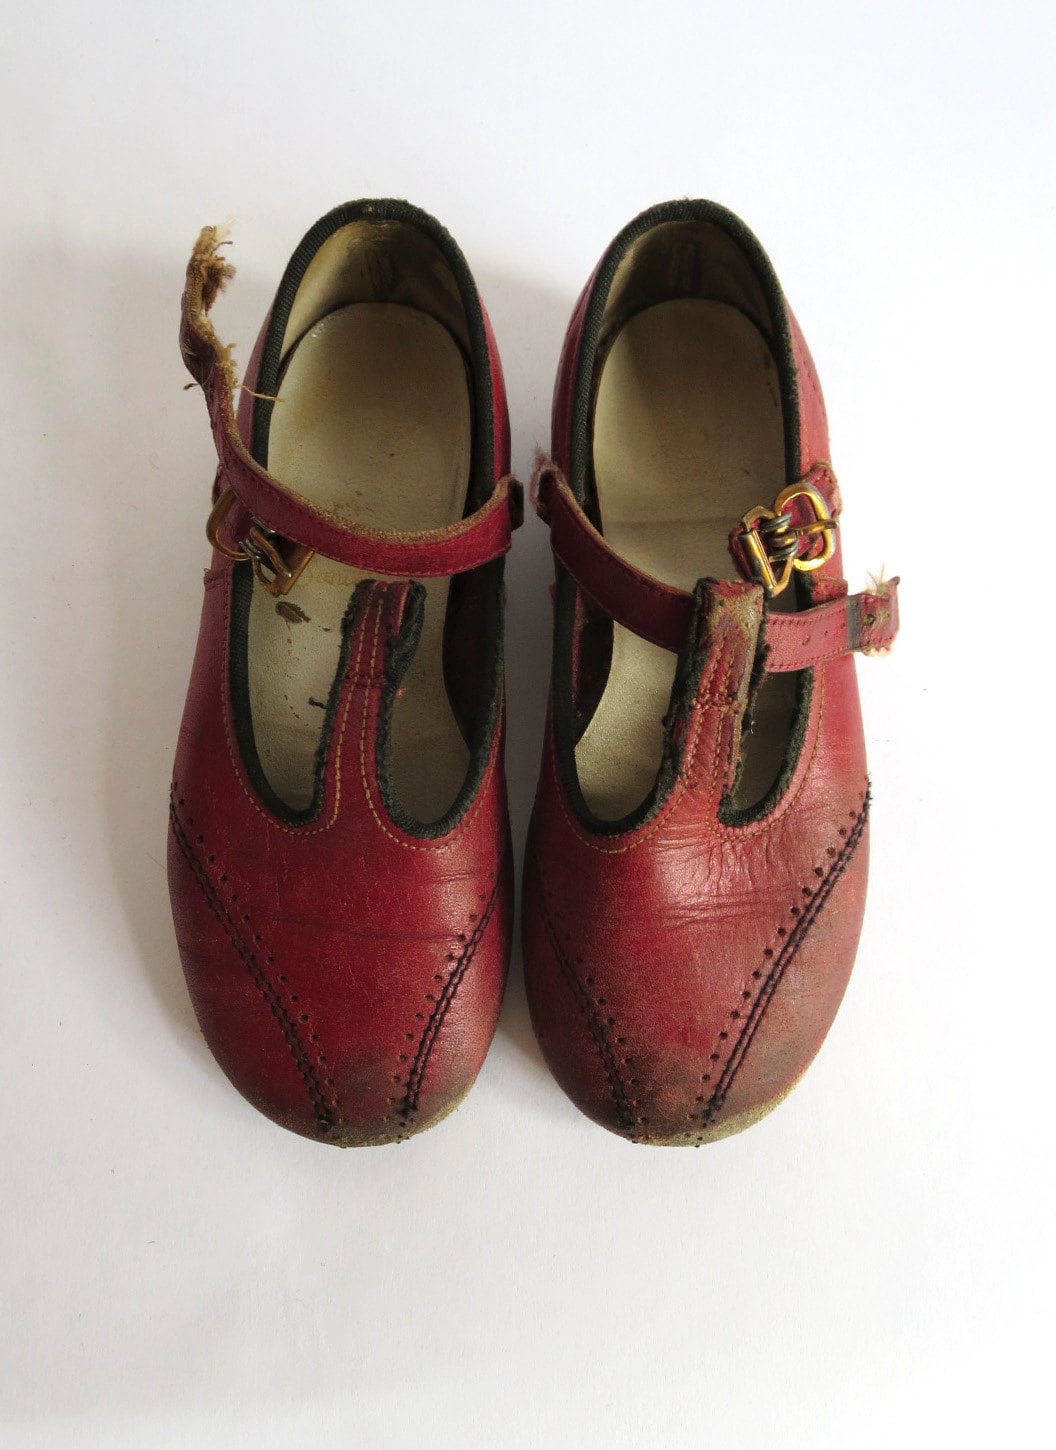 Vintage 1960s Red Leather Baby Shoes by Penny's Boots with